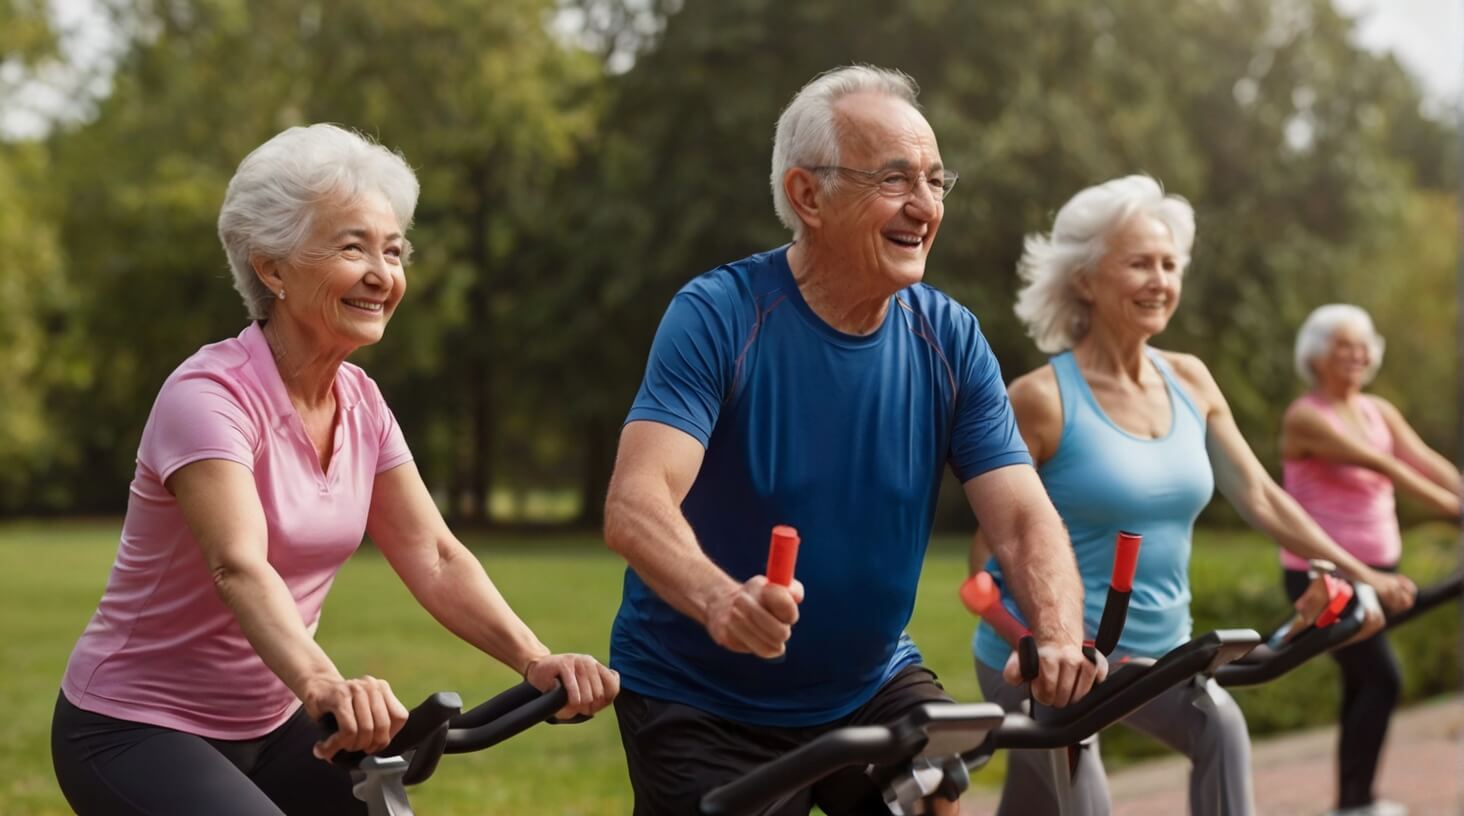 Image featuring older adults engaging in exercise, showcasing the physical, mental, and emotional benefits of staying active in later life.